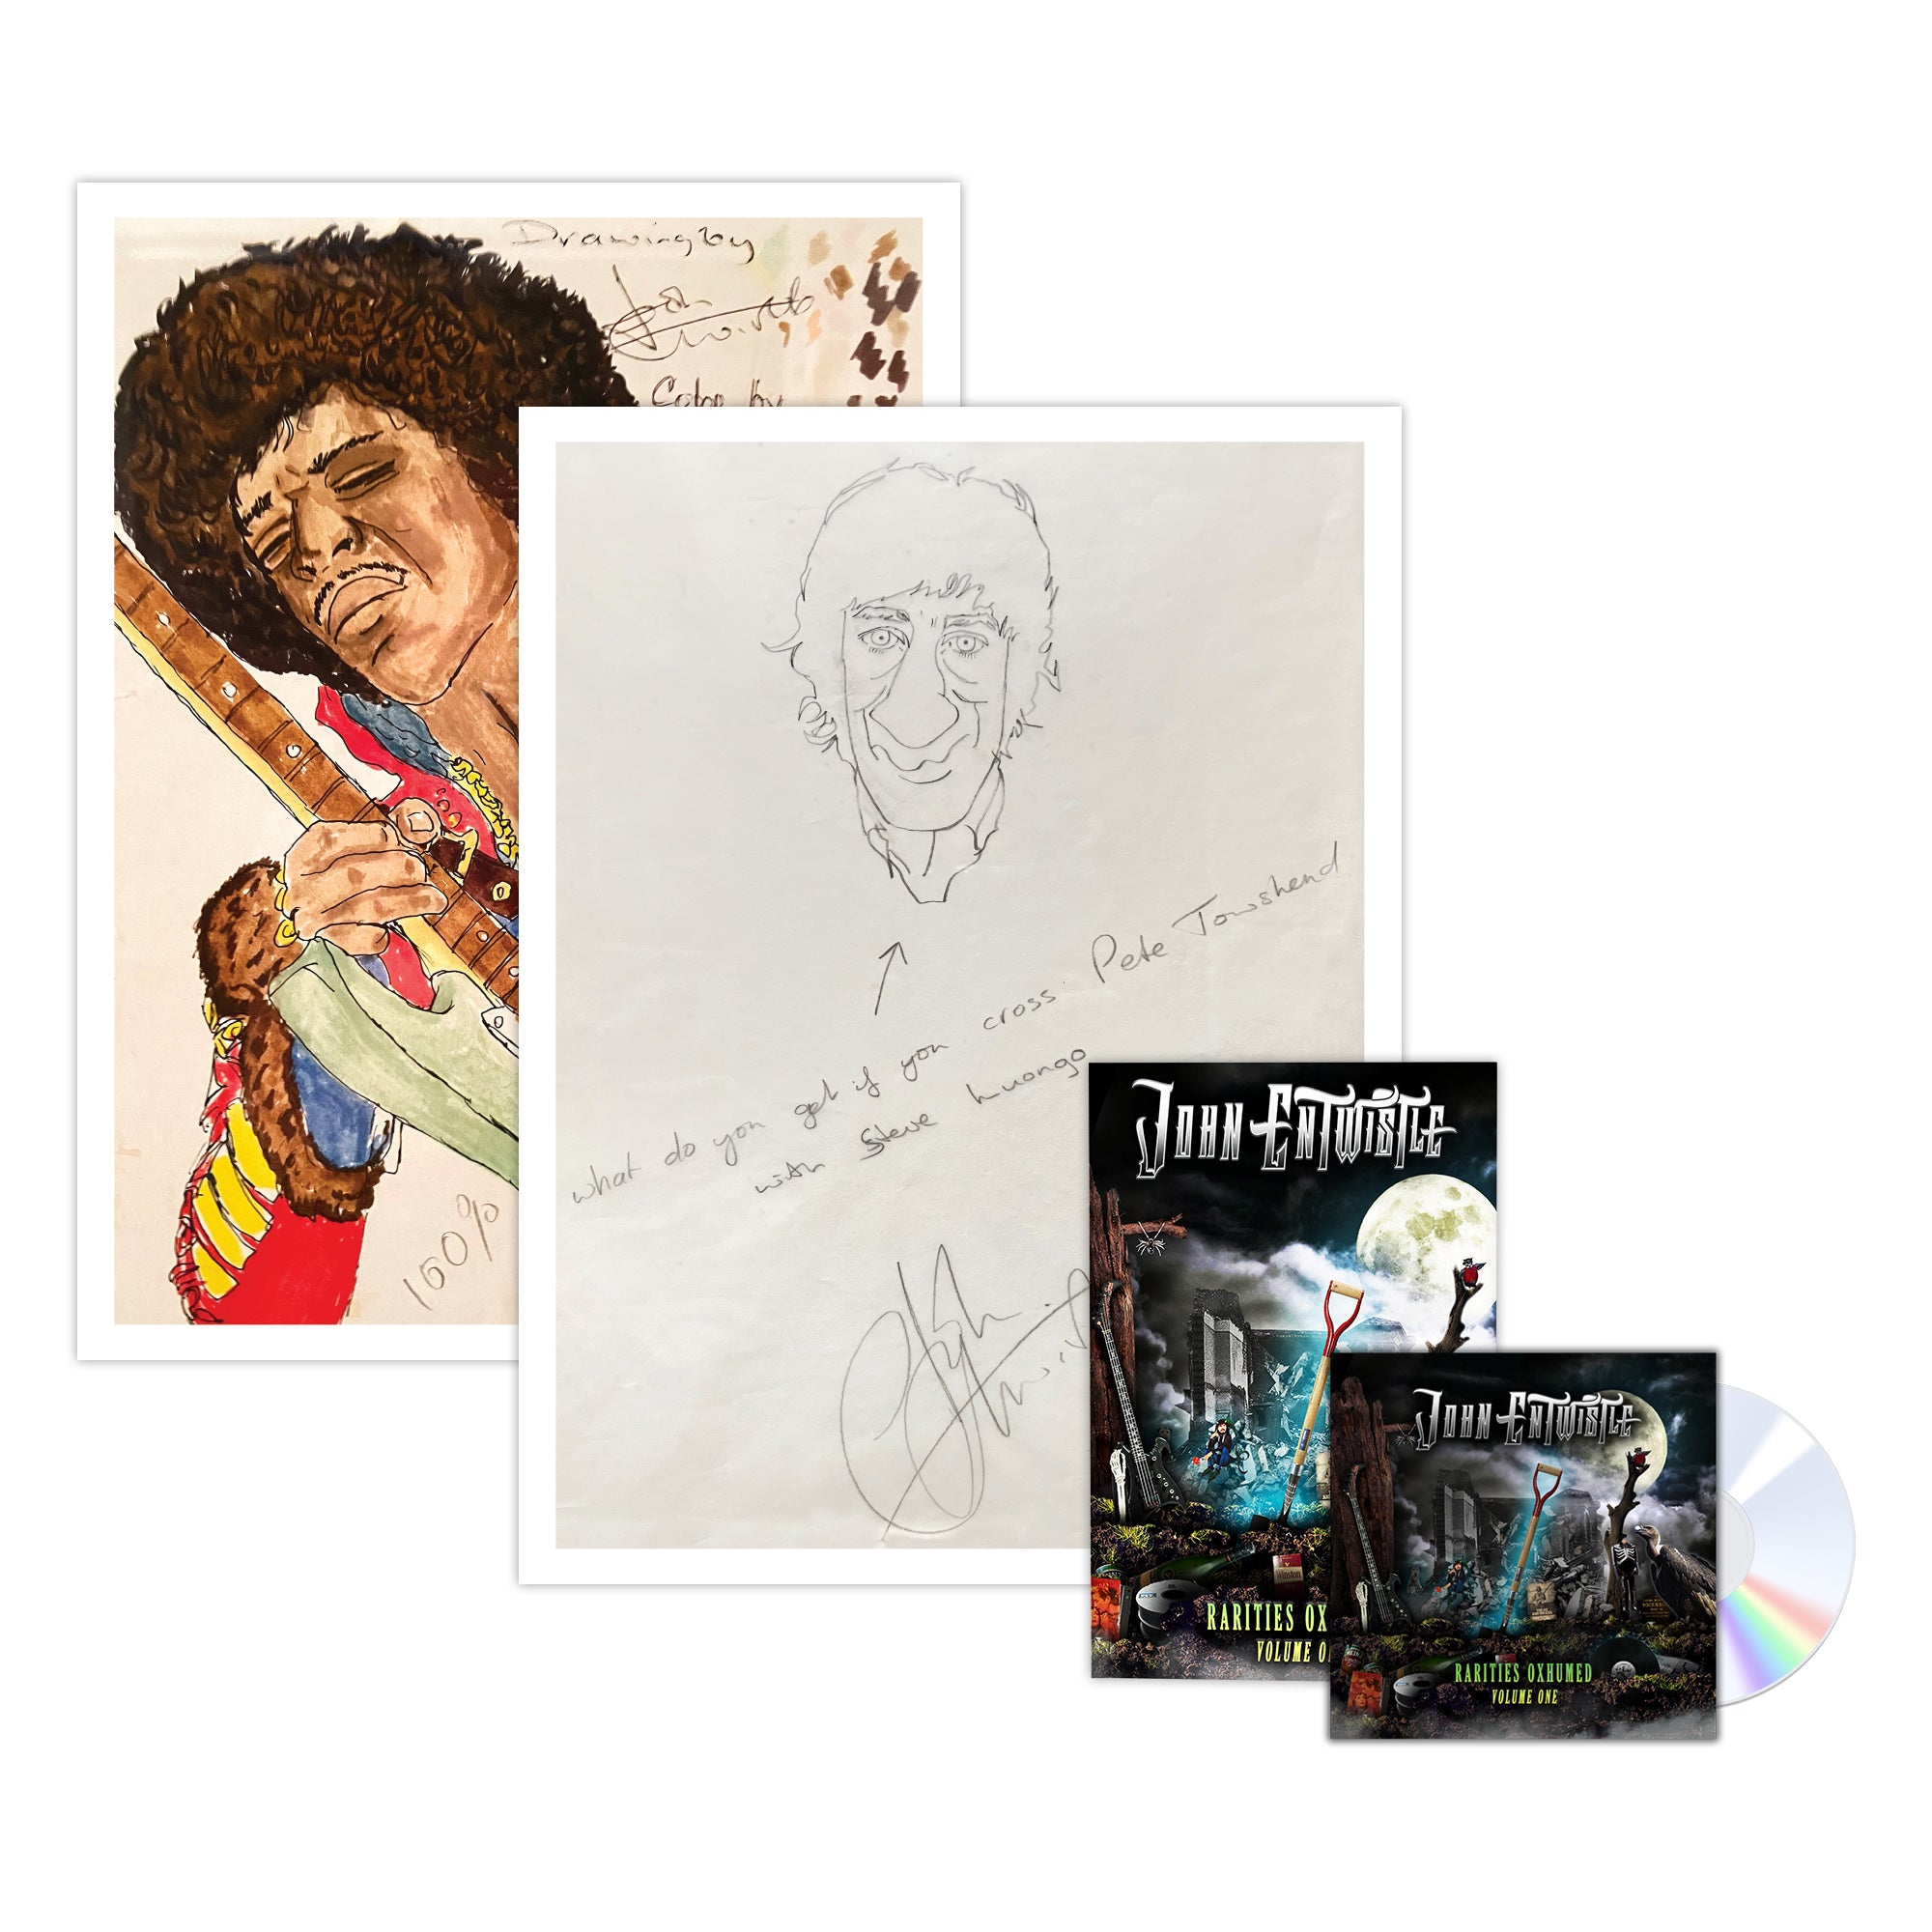 JOHN ENTWISTLE 'RARITIES OXHUMED: VOLUME ONE' CD & 12-PAGE BOOKLET + 2 EXCLUSIVE HAND-NUMBERED ART PRINTS BY JOHN ENTWISTLE